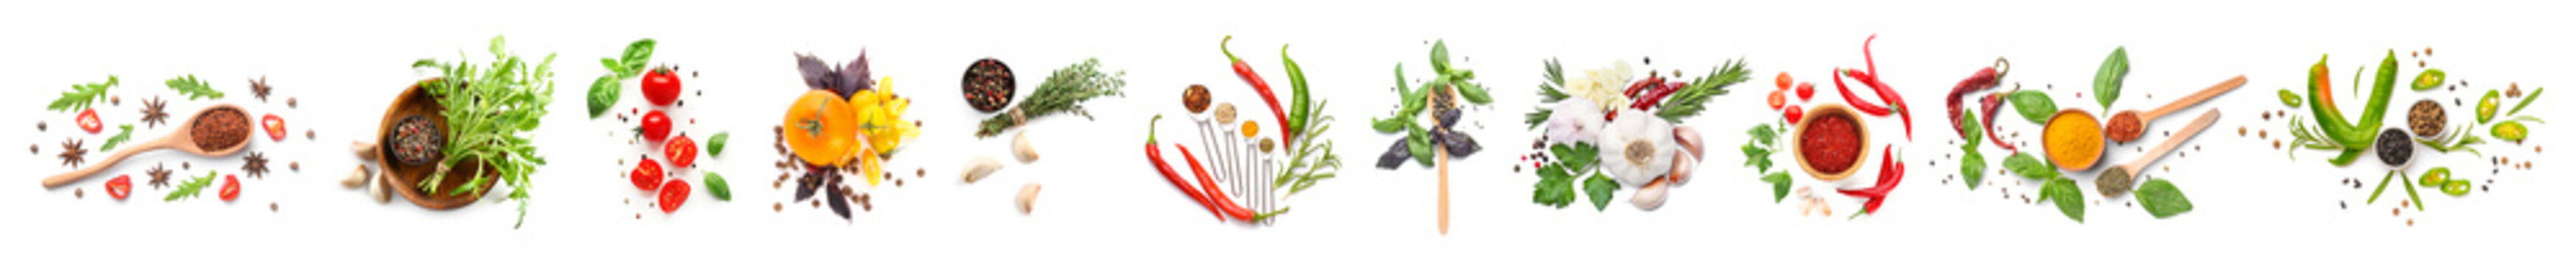 Different fresh spices, herbs and vegetables on white background